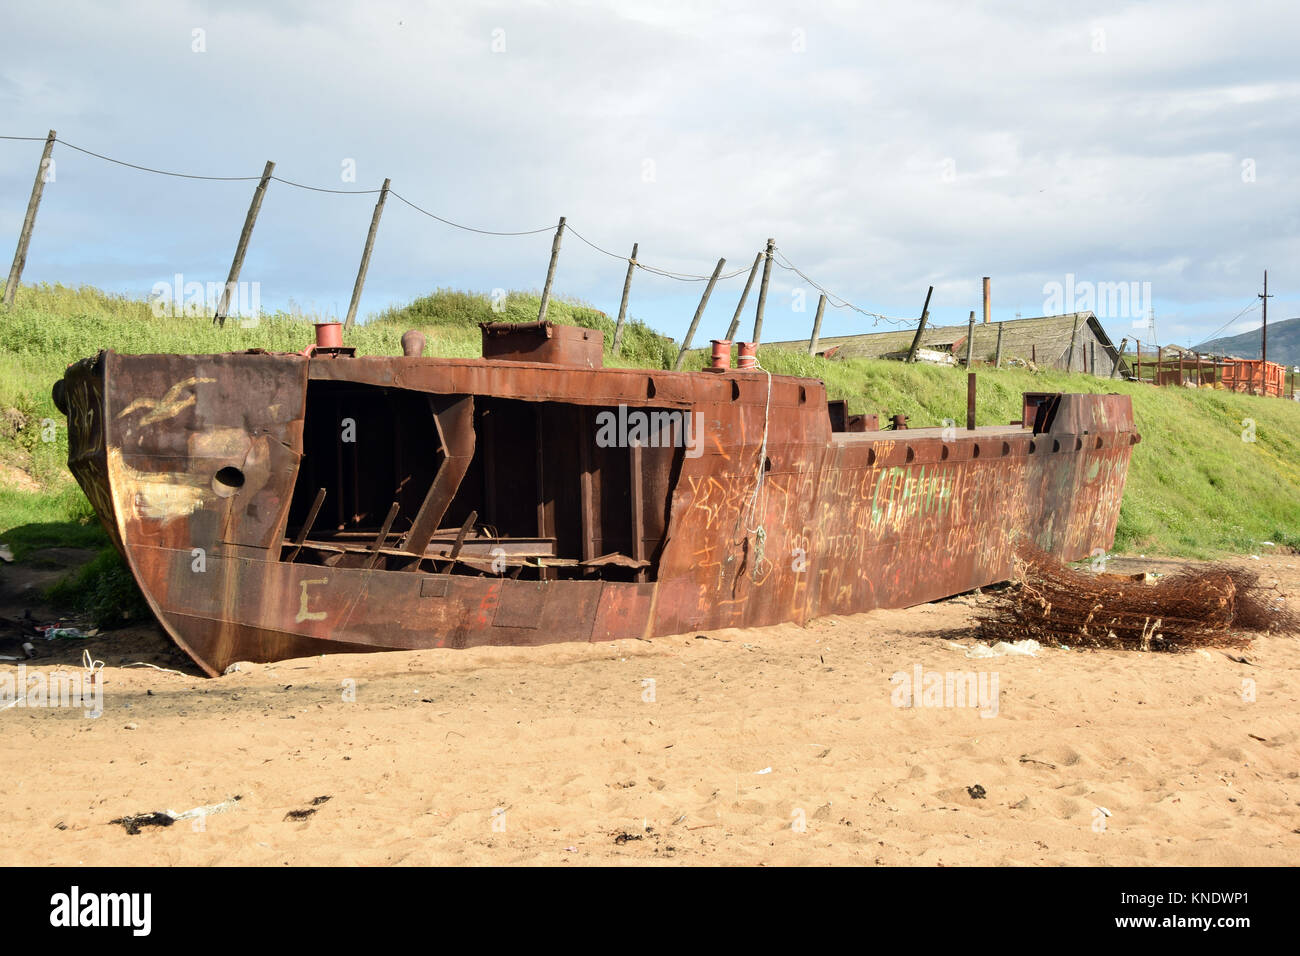 In Magadan, the wreck of a barge used to unload prisonners from the boats coming from Vladivostok at the time of the Dalstroi organization. Stock Photo